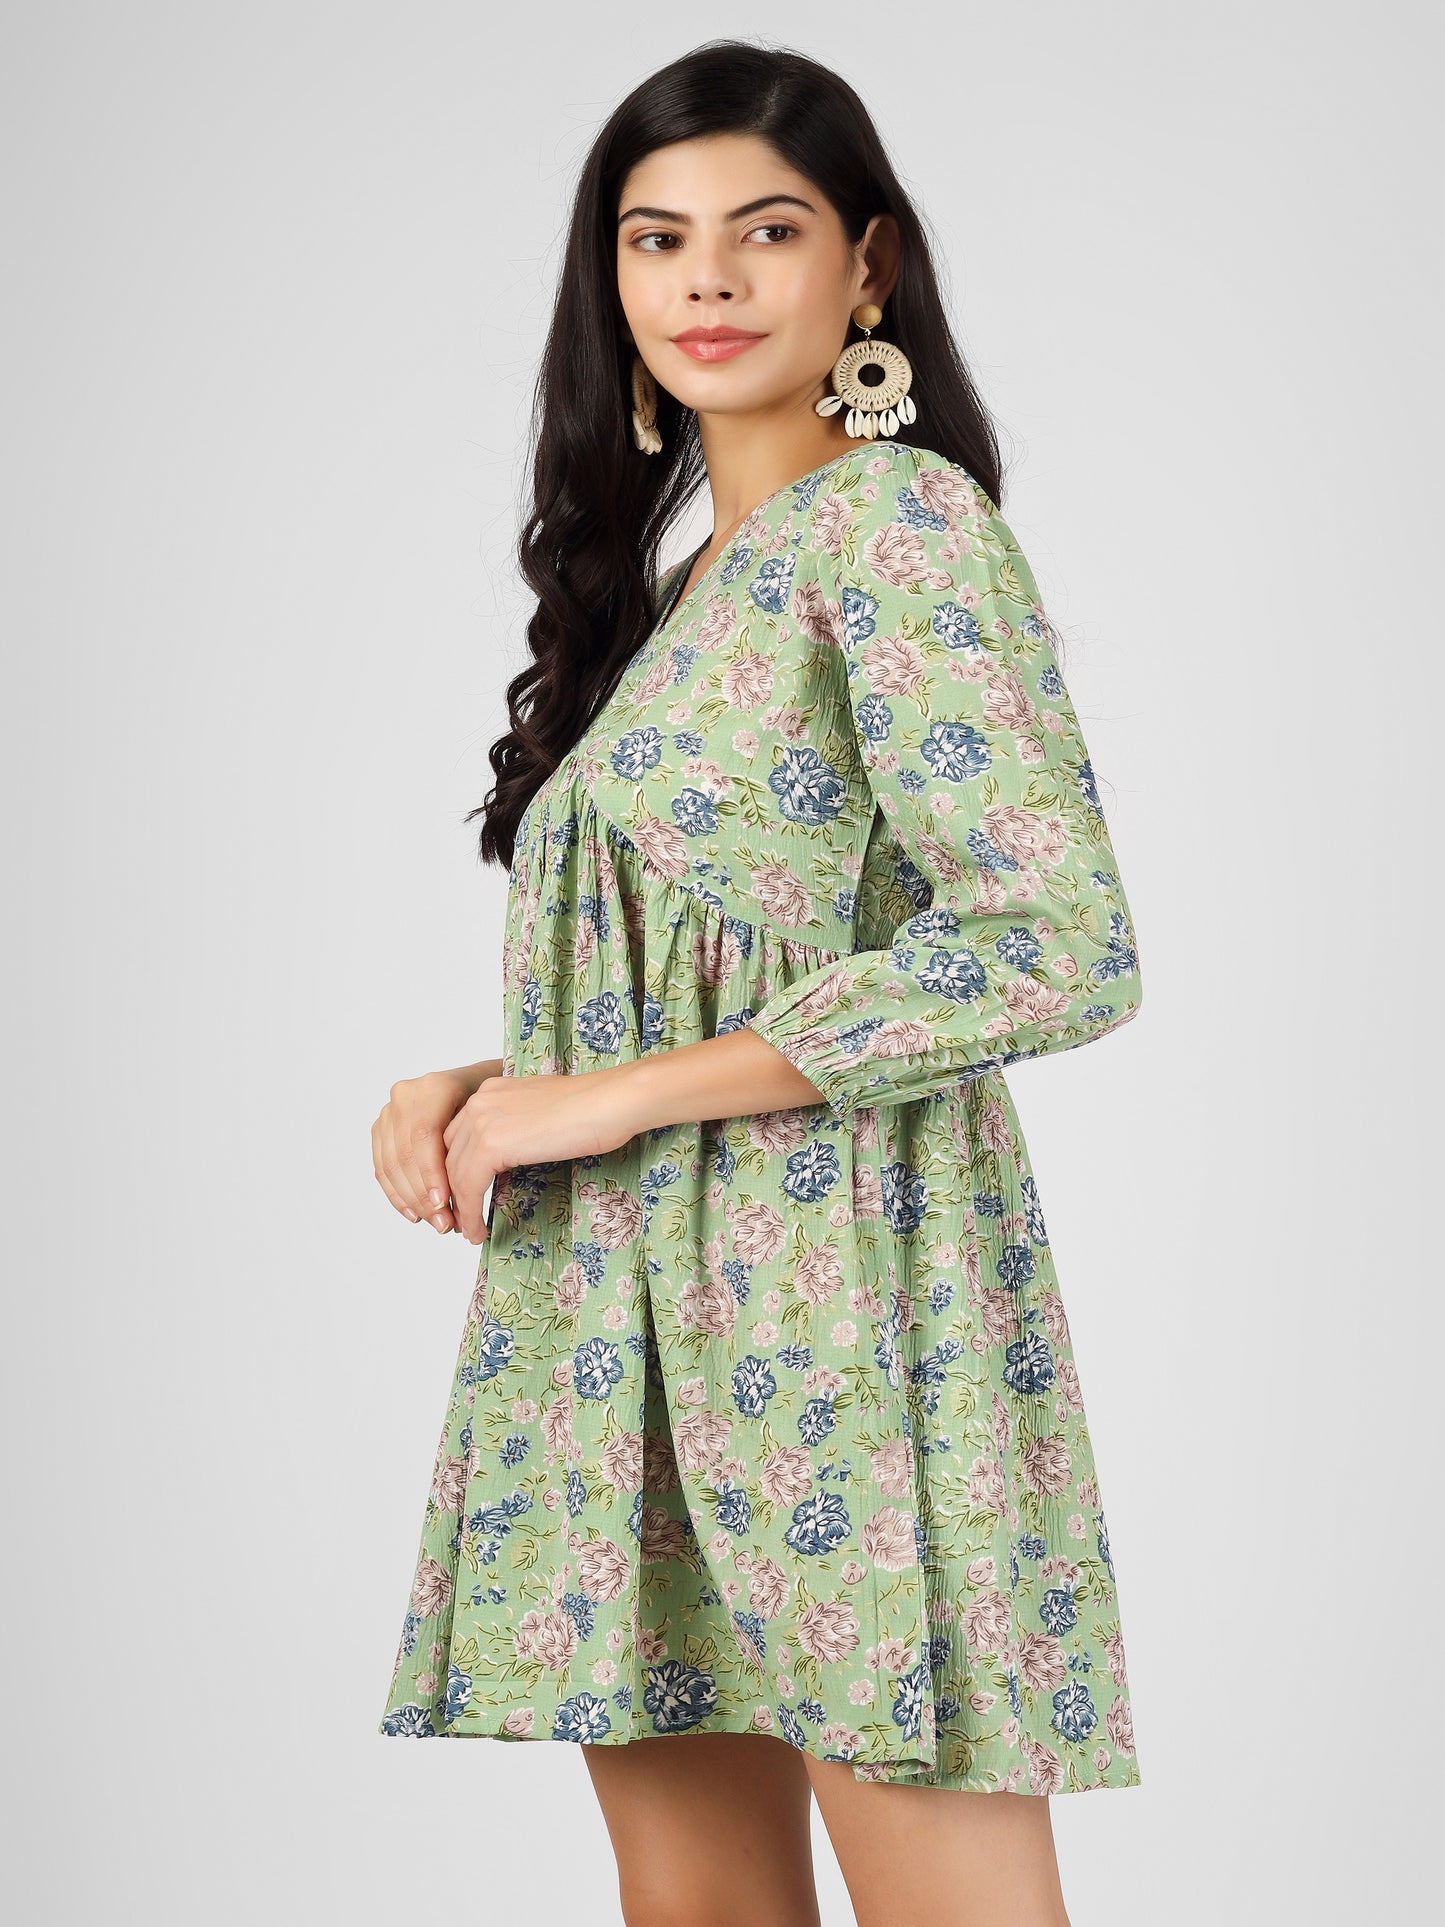 Women's Pretty Green Floral Printed Fit and Flare Dress